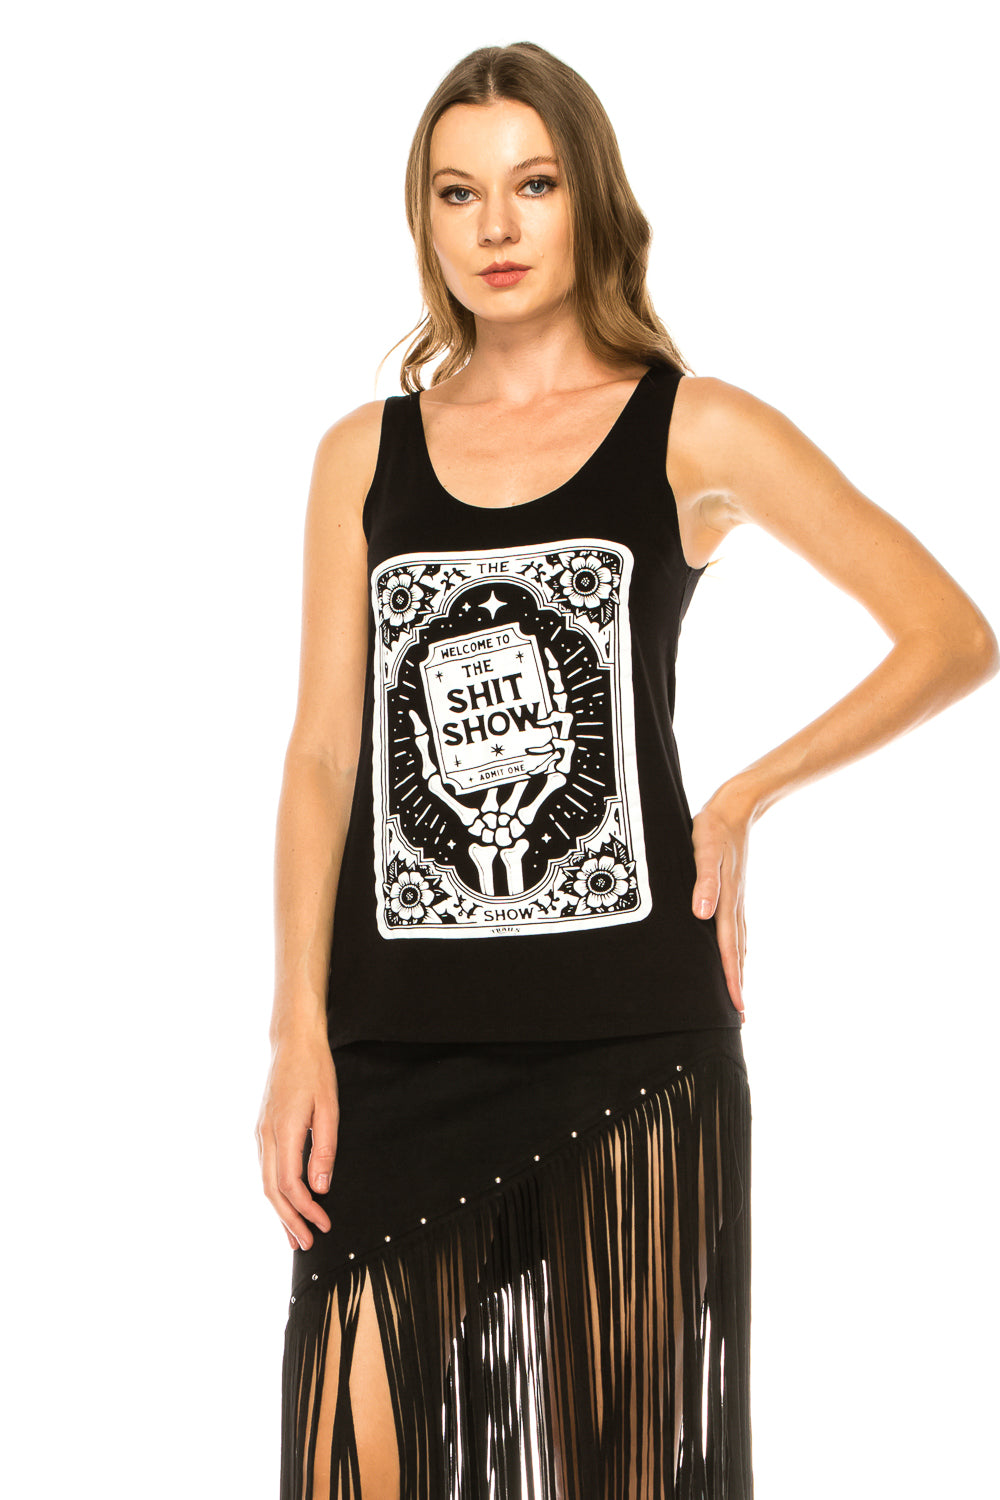 WELCOME TO THE SH*T SHOW TANK TOP - Trailsclothing.com